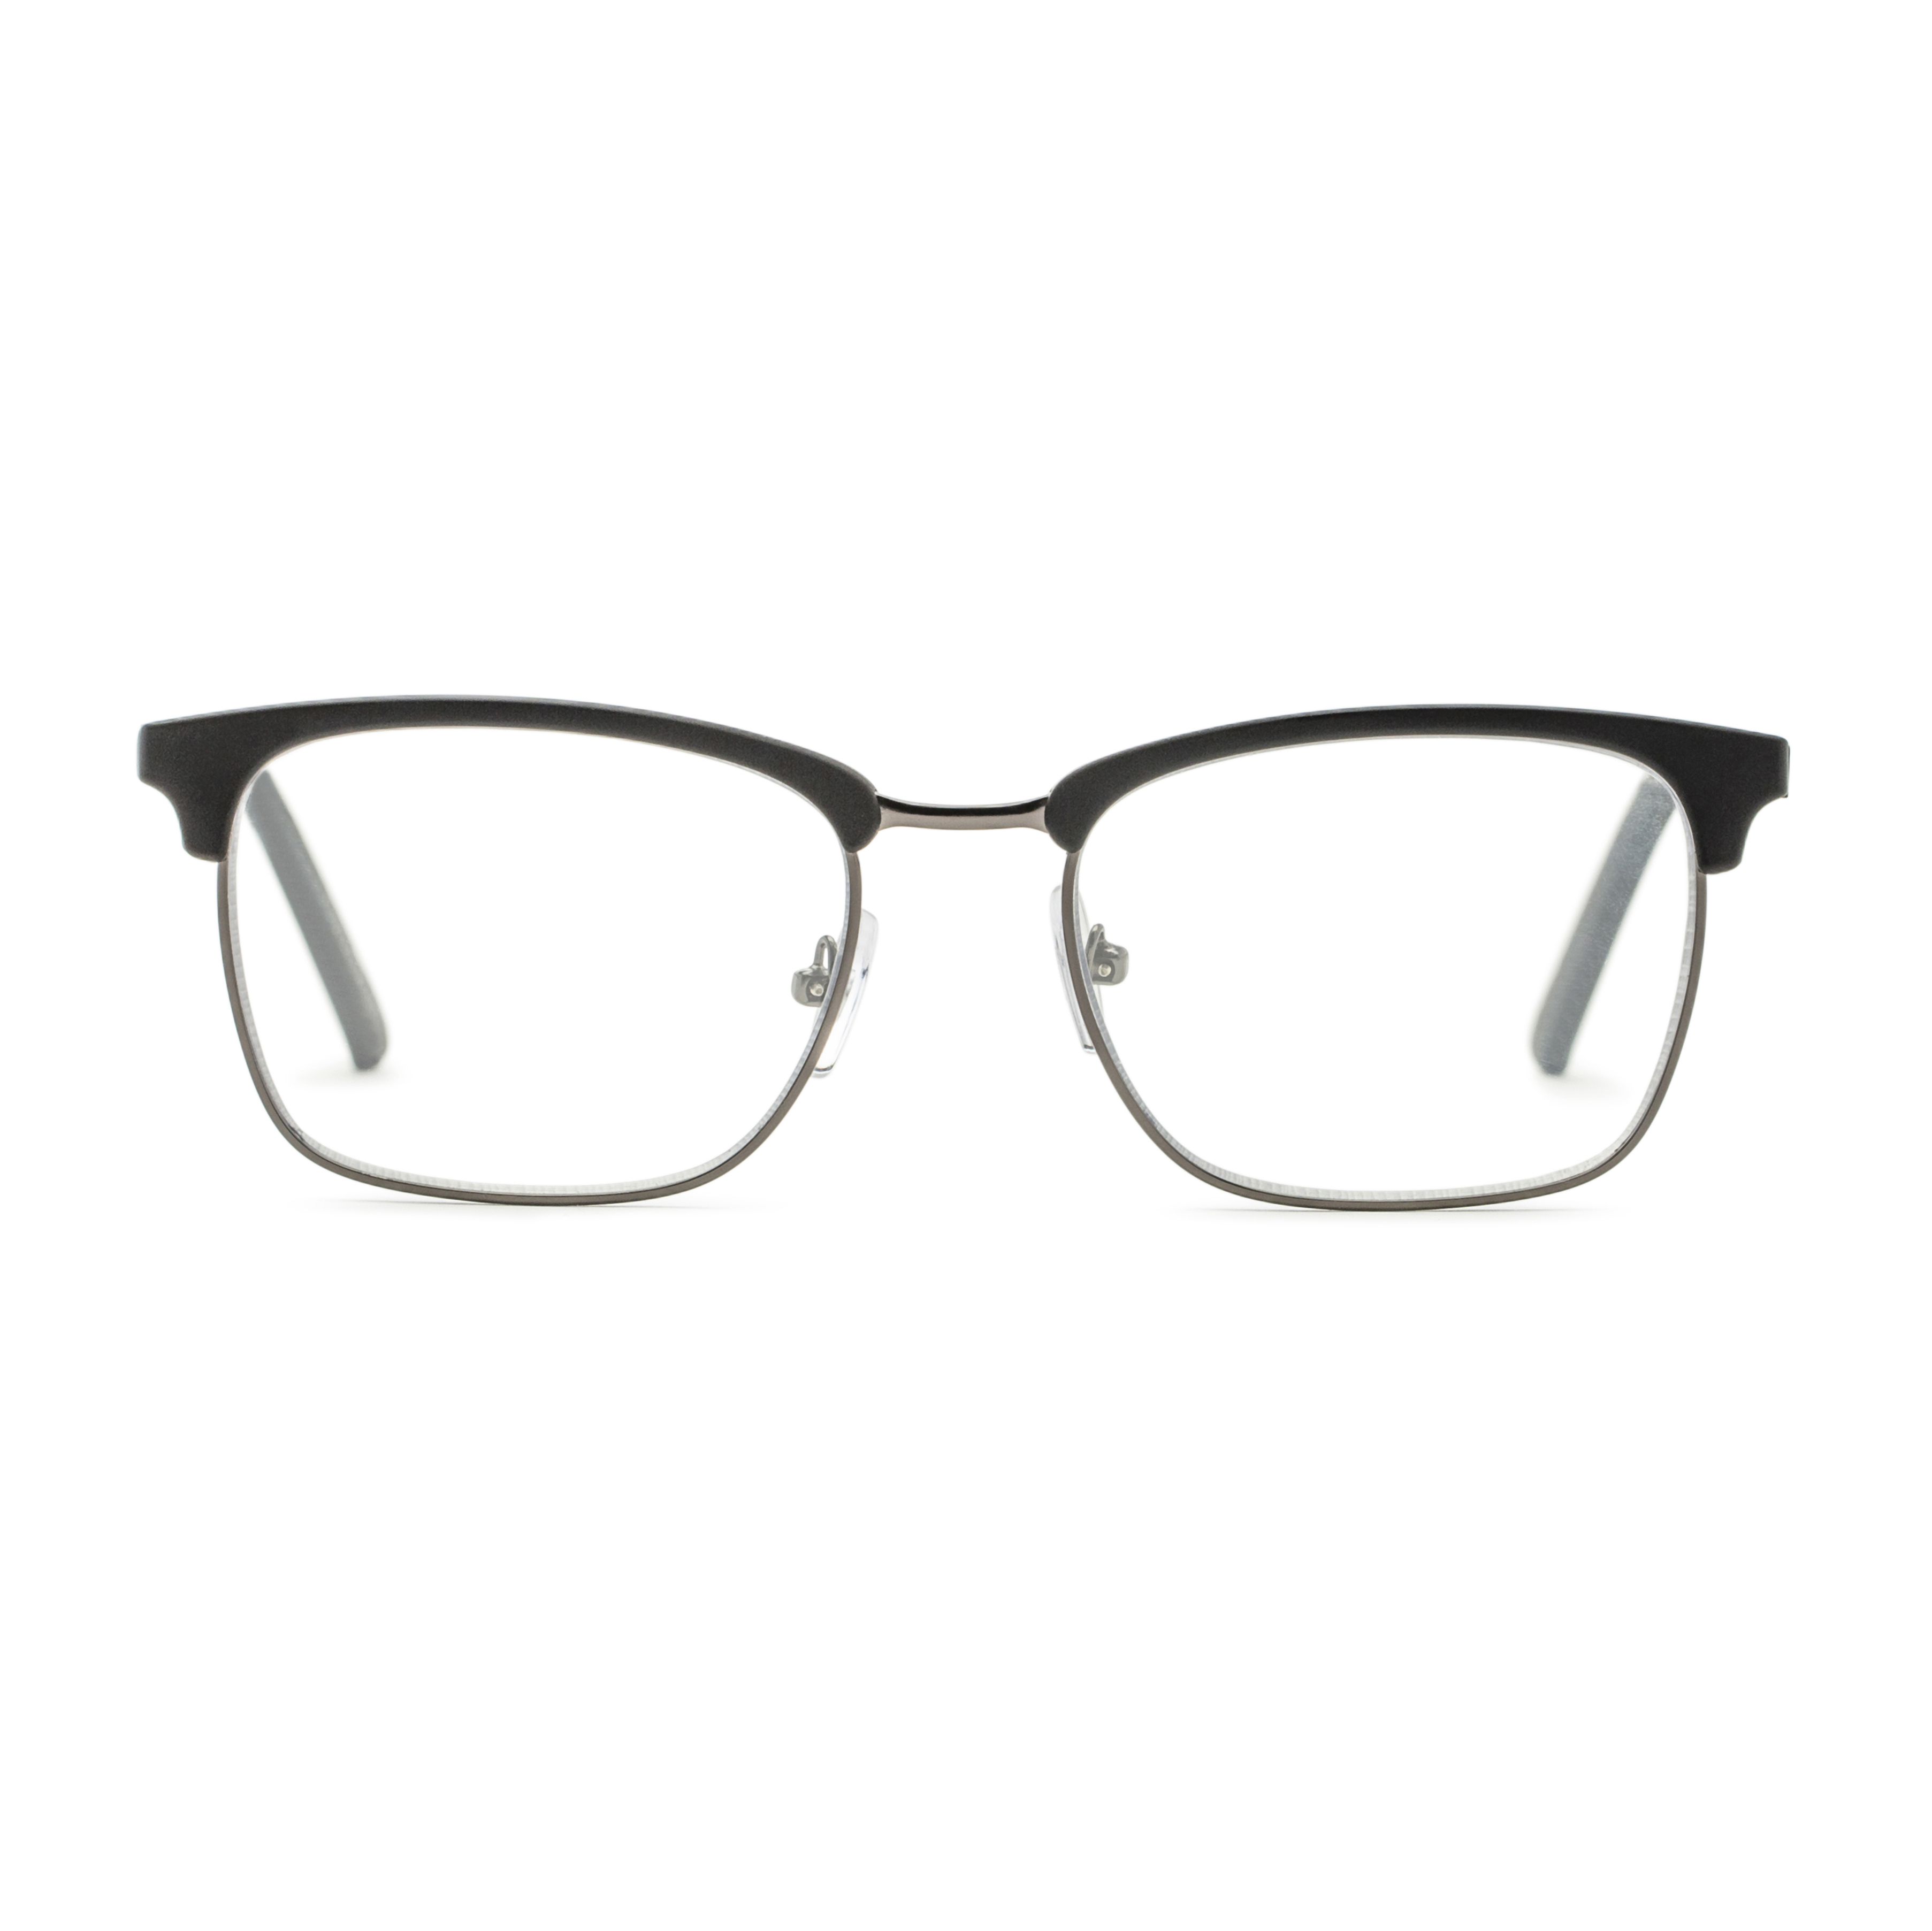 Men's Club Reading Glasses In Black By Foster Grant - Perkins Pop Of Power® Bifocal Style Readers - +3.00